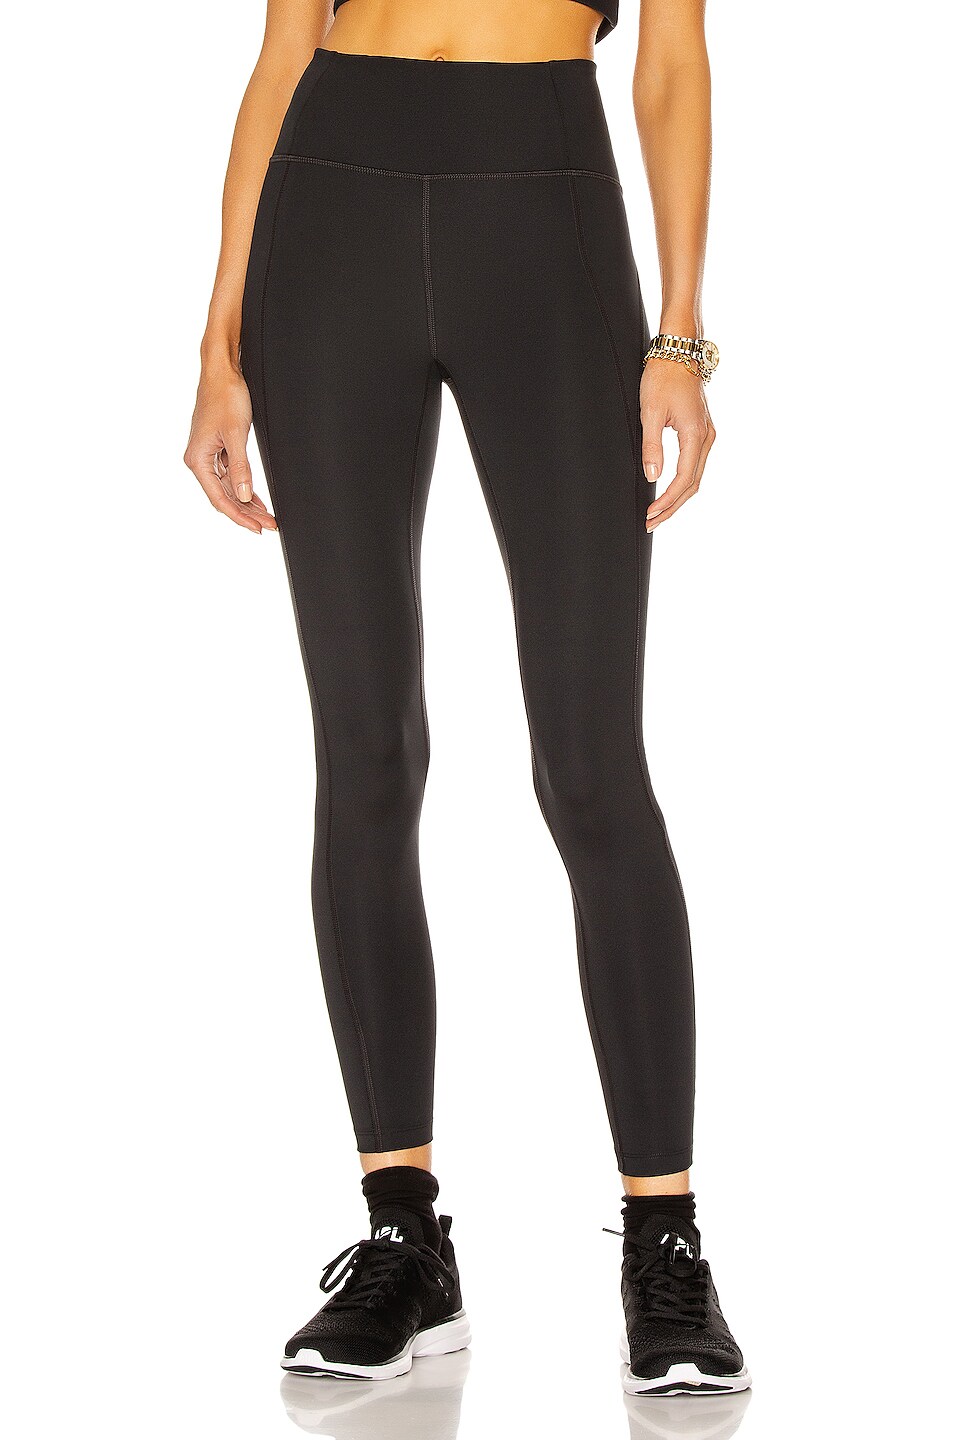 Image 1 of Girlfriend Collective High-Rise Compressive Legging in Black